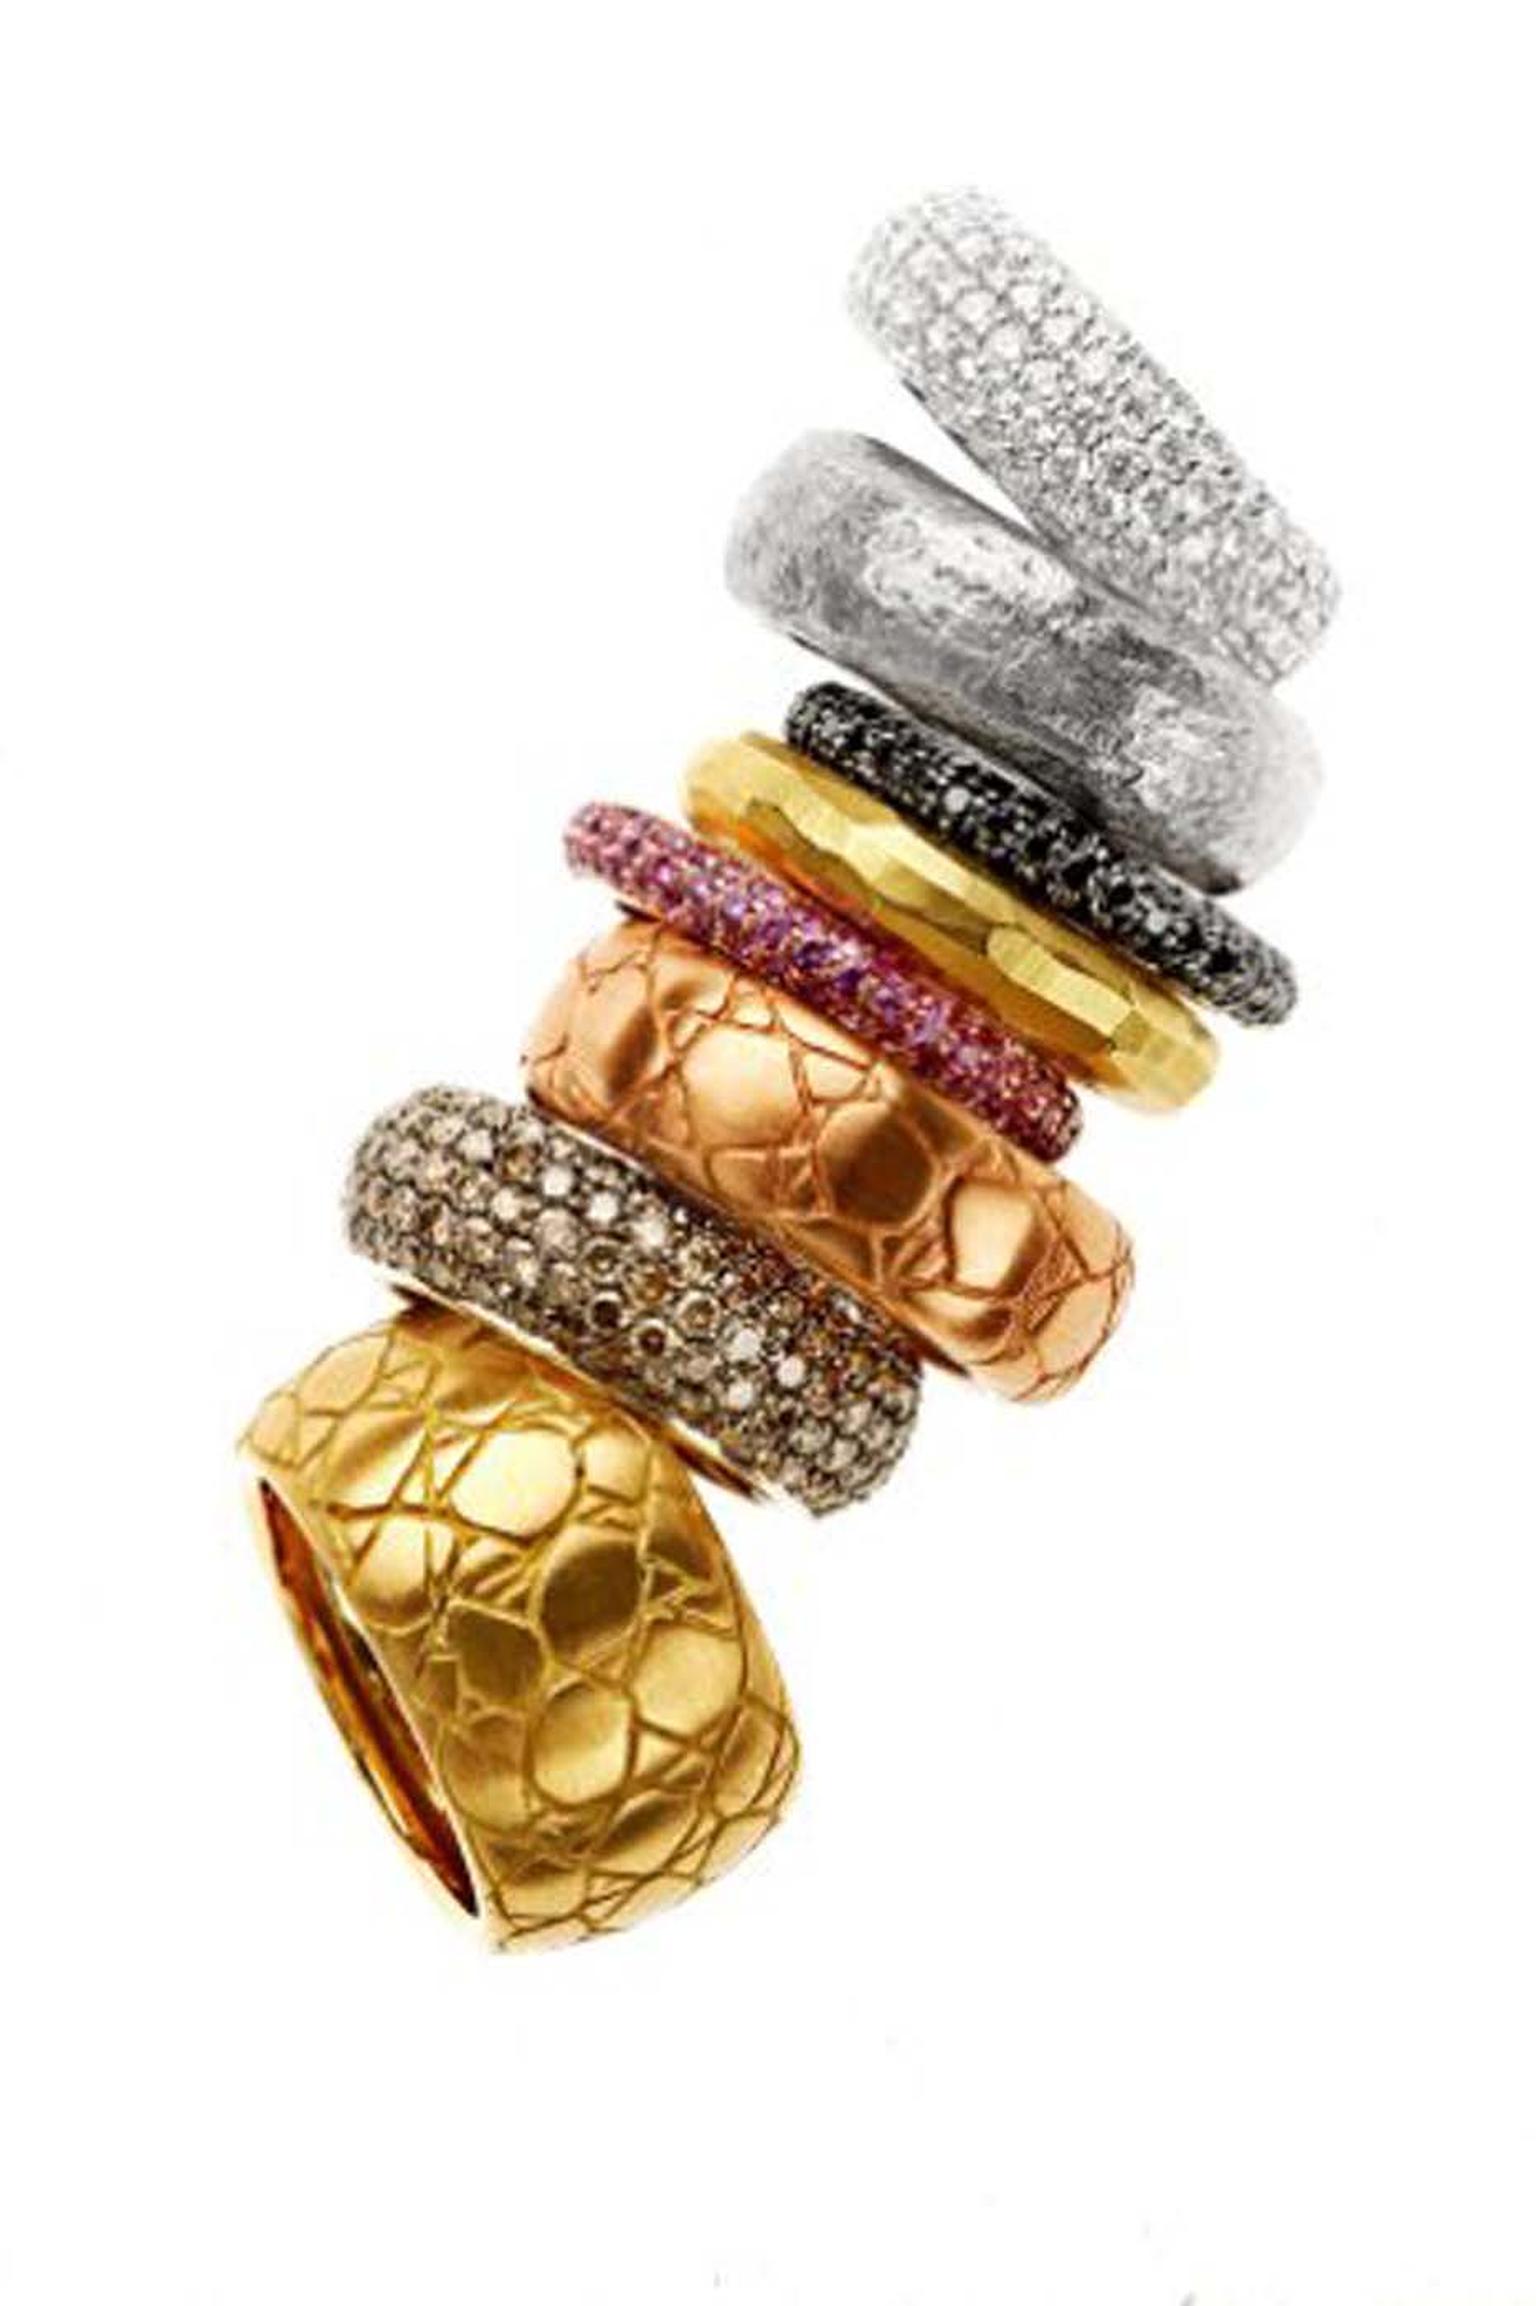 Elena Carrera rings from Texturas collection in pink, white and yellow gold with crocodile, bamboo and hemp textures as well as brown diamond and coloured sapphires. Prices start at 780€.